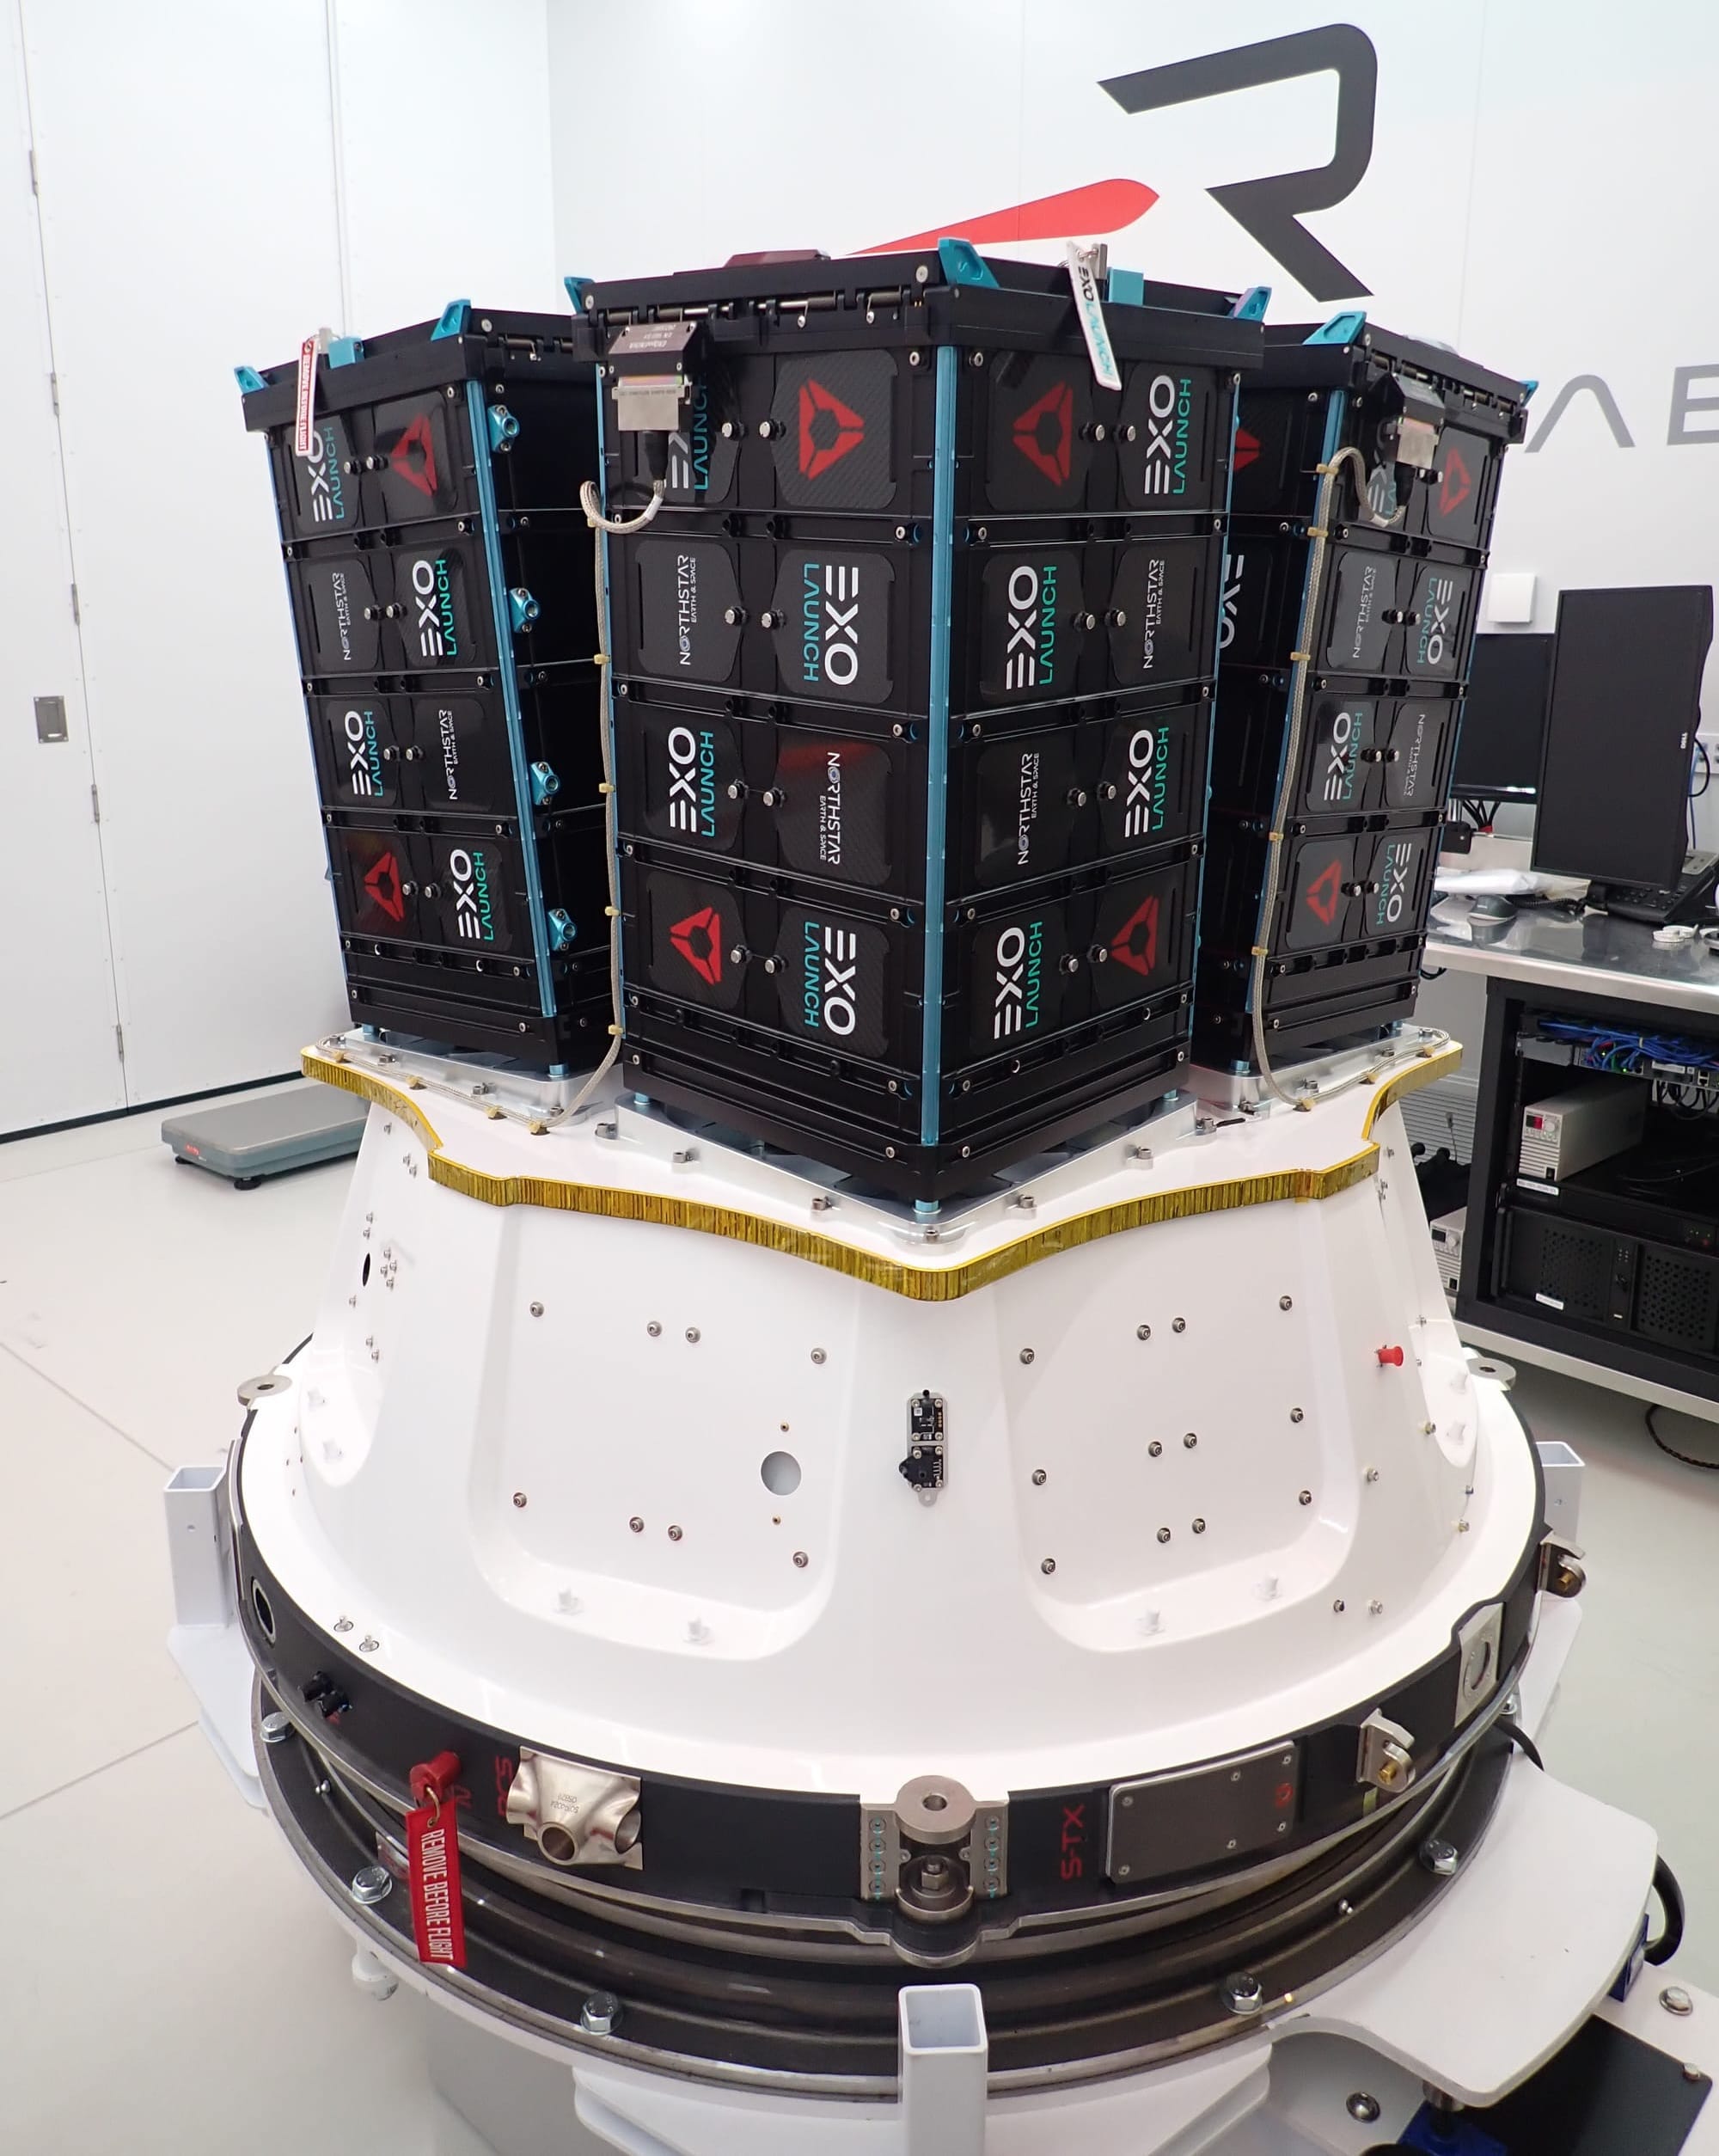 NorthStar's four satellites attached to rocket labs kick-stage. ©Rocket Lab